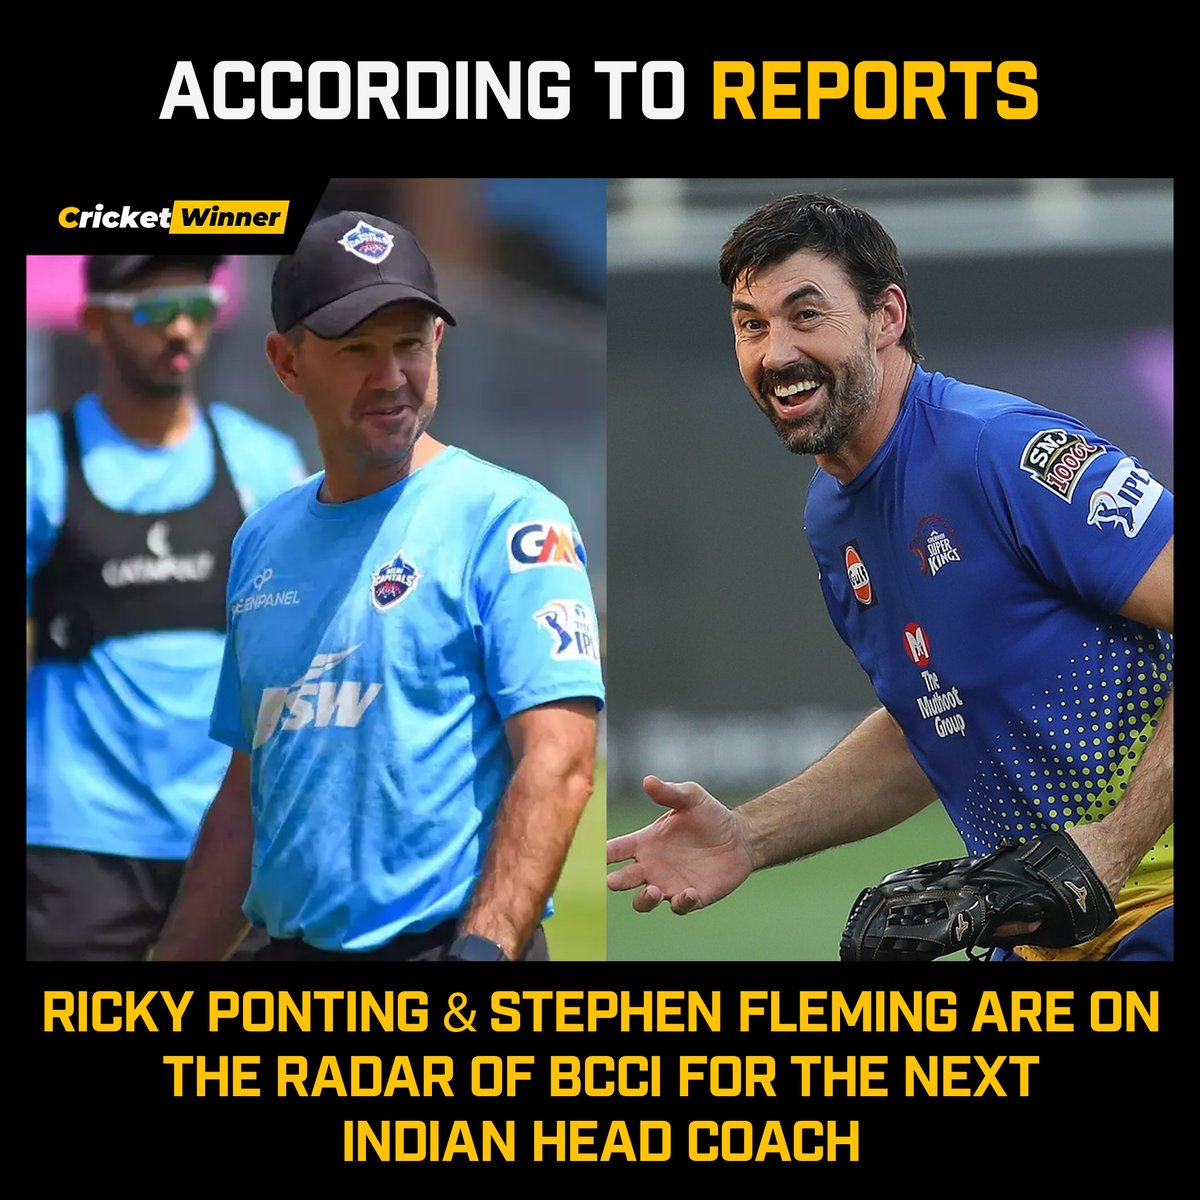 BCCI Eyes Ricky Ponting & Stephen Fleming as Potential Indian Head Coach Candidates

#Cricketfans #BCCI